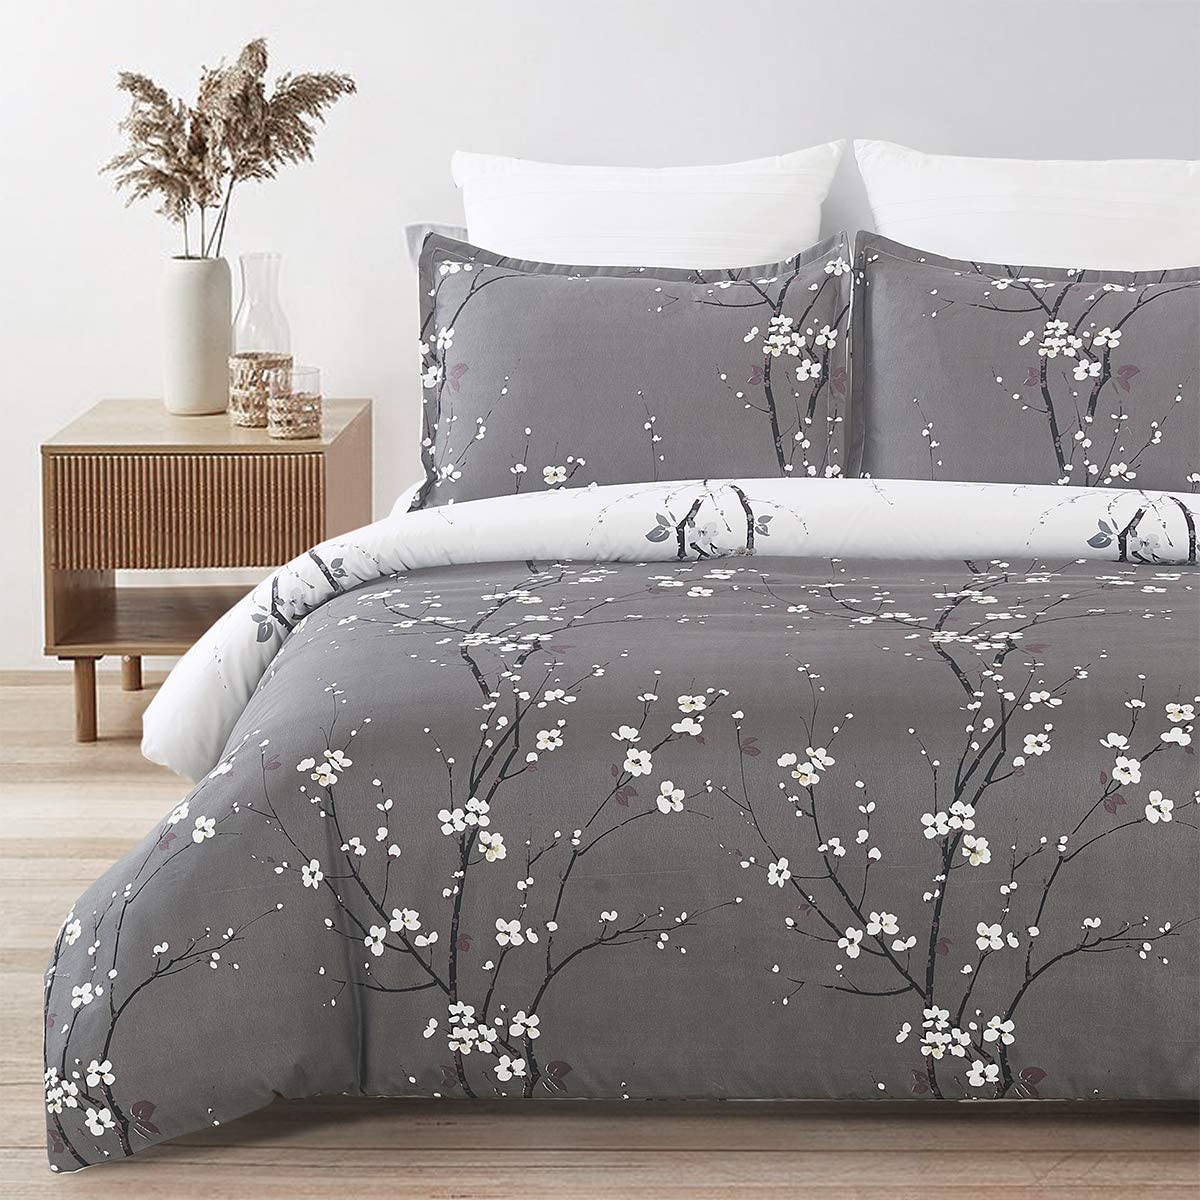 Price:$35.95  Soft Brushed Microfiber Duvet Cover Set with Zipper Closure and Corner Ties, Plum Blossom/Branch Floral Printed Pattern, Dark Grey and White Color, Reversible Design, King Size(104x90 Inches) : Home & Kitchen